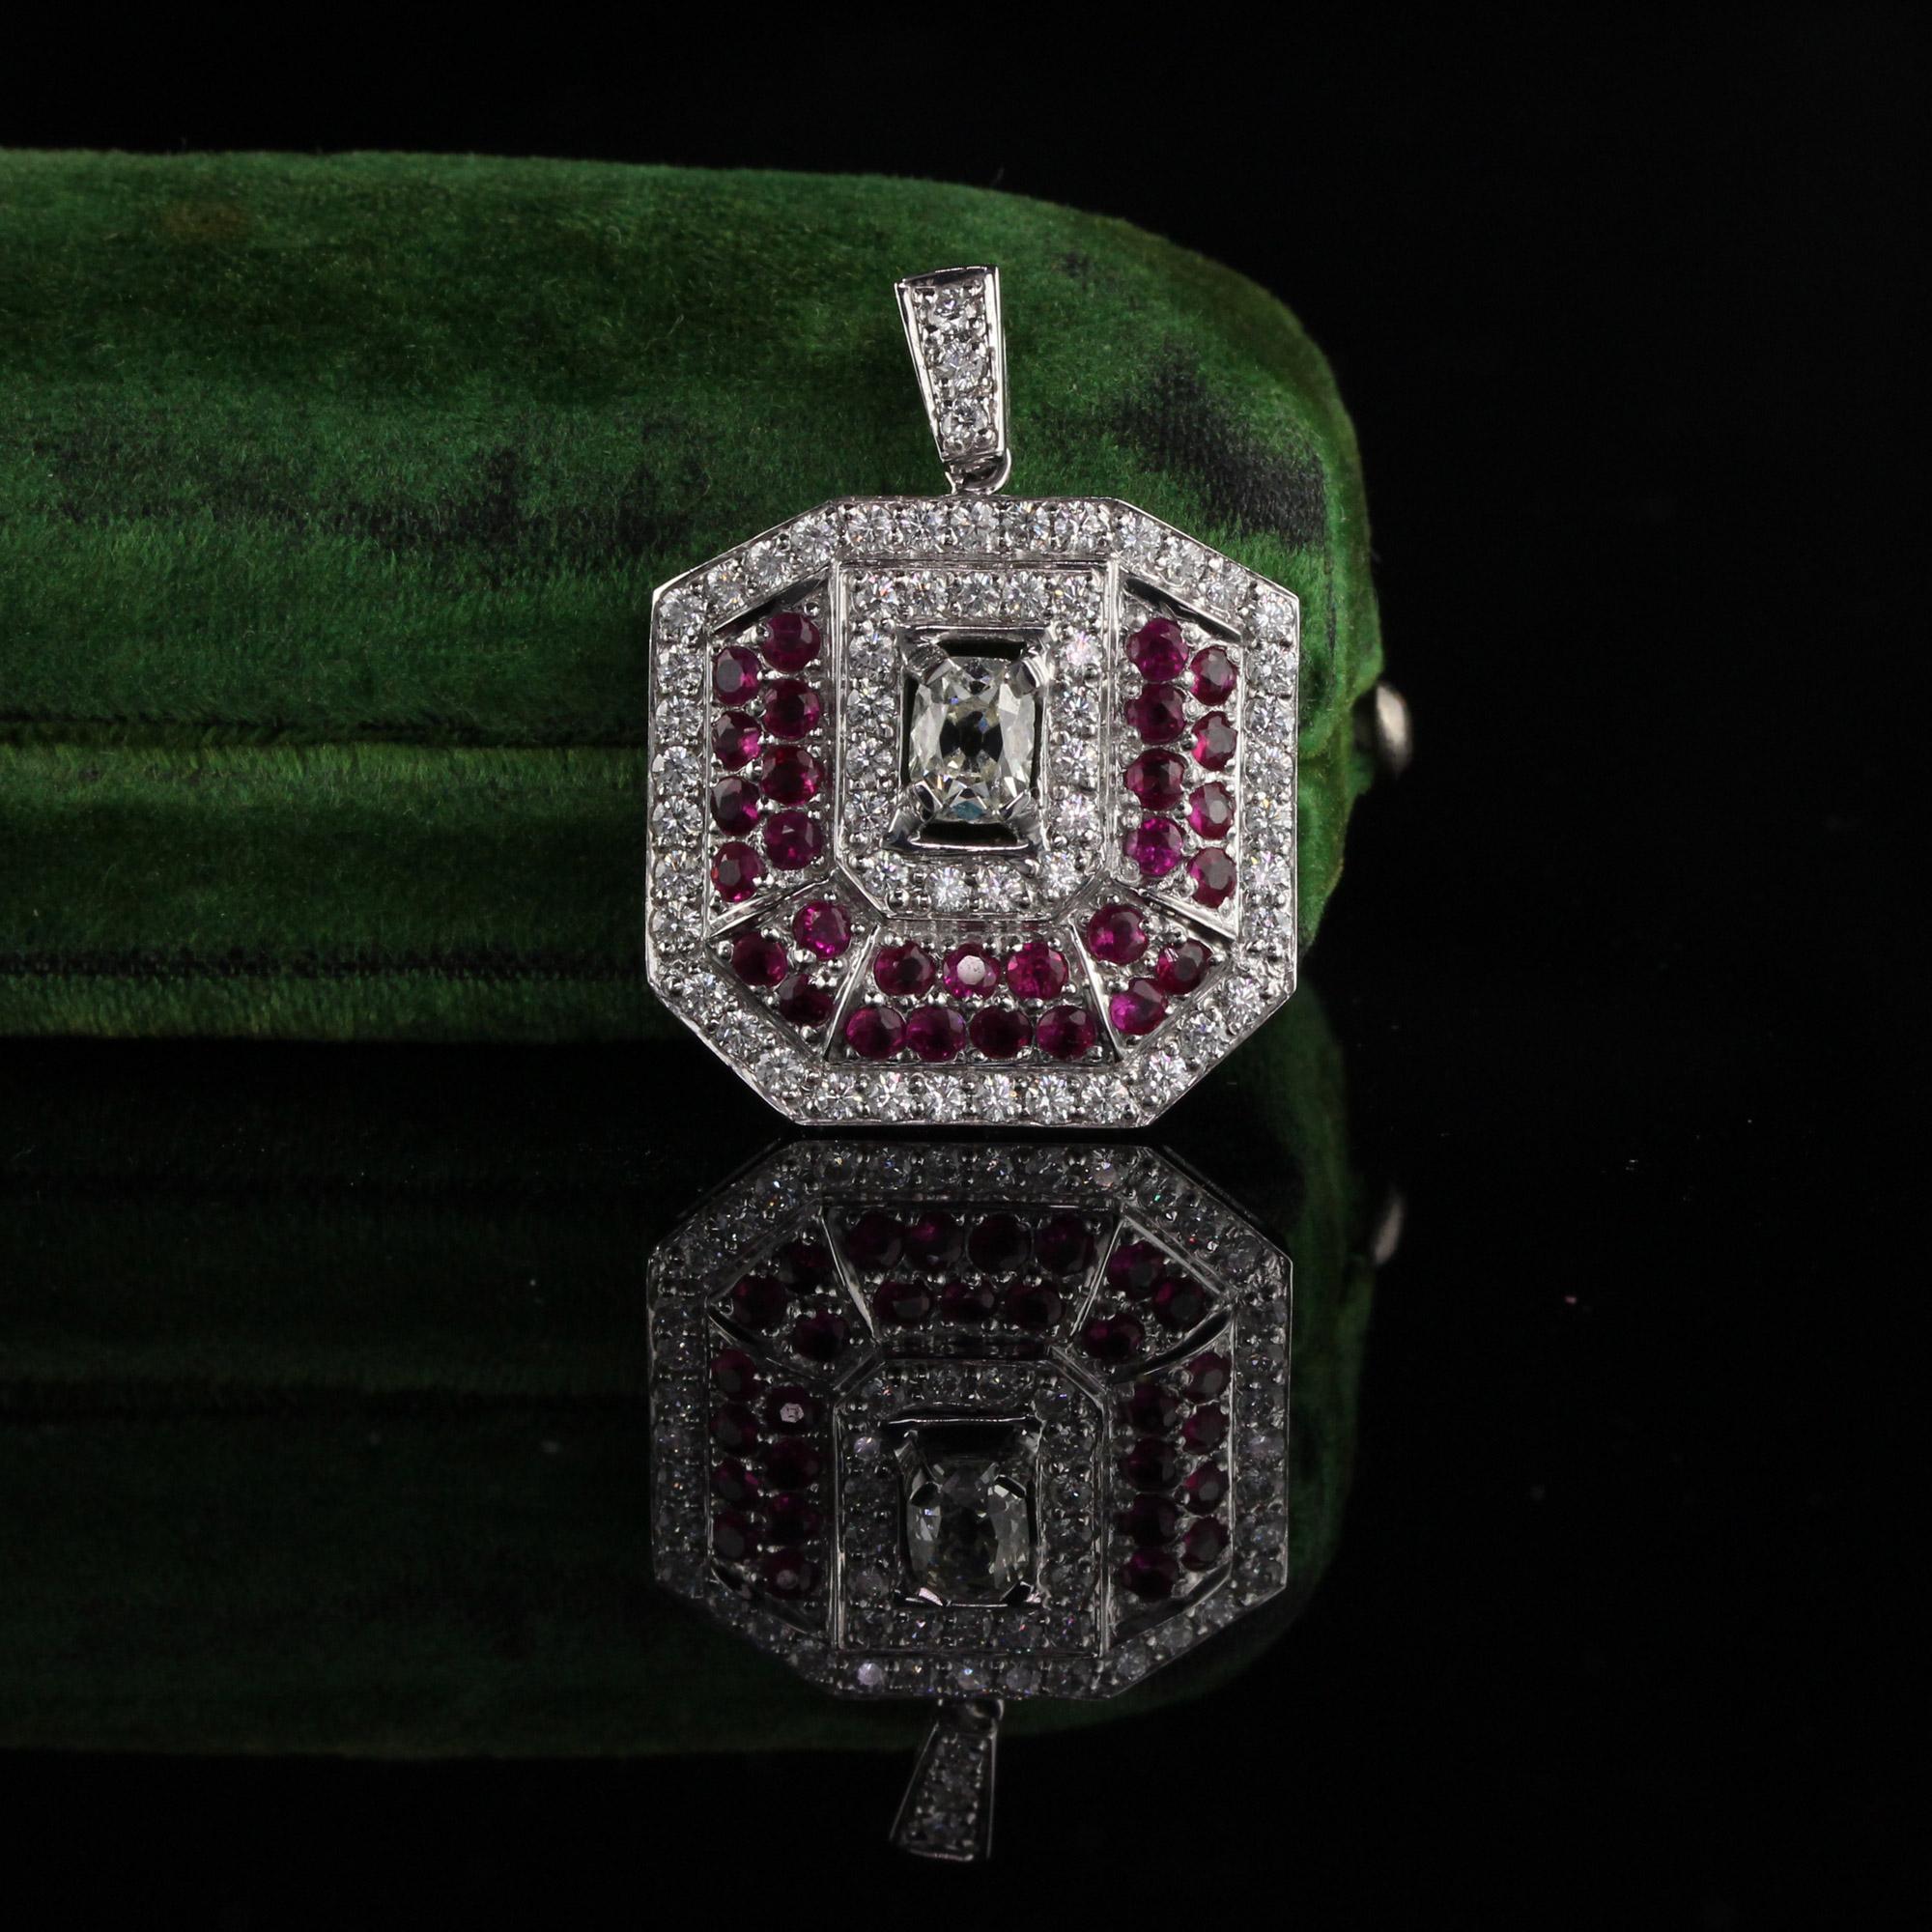 Stunning Diamond and Ruby Pendant with an Old Cushion Cut in the center of the pendant. 

Metal: Platinum

Weight: 8.4 Grams

Total Diamond Weight: Approximately 1.65 CTS

Center Diamond Weight: Approximately 0.50 CTS

Center Diamond Color: J -